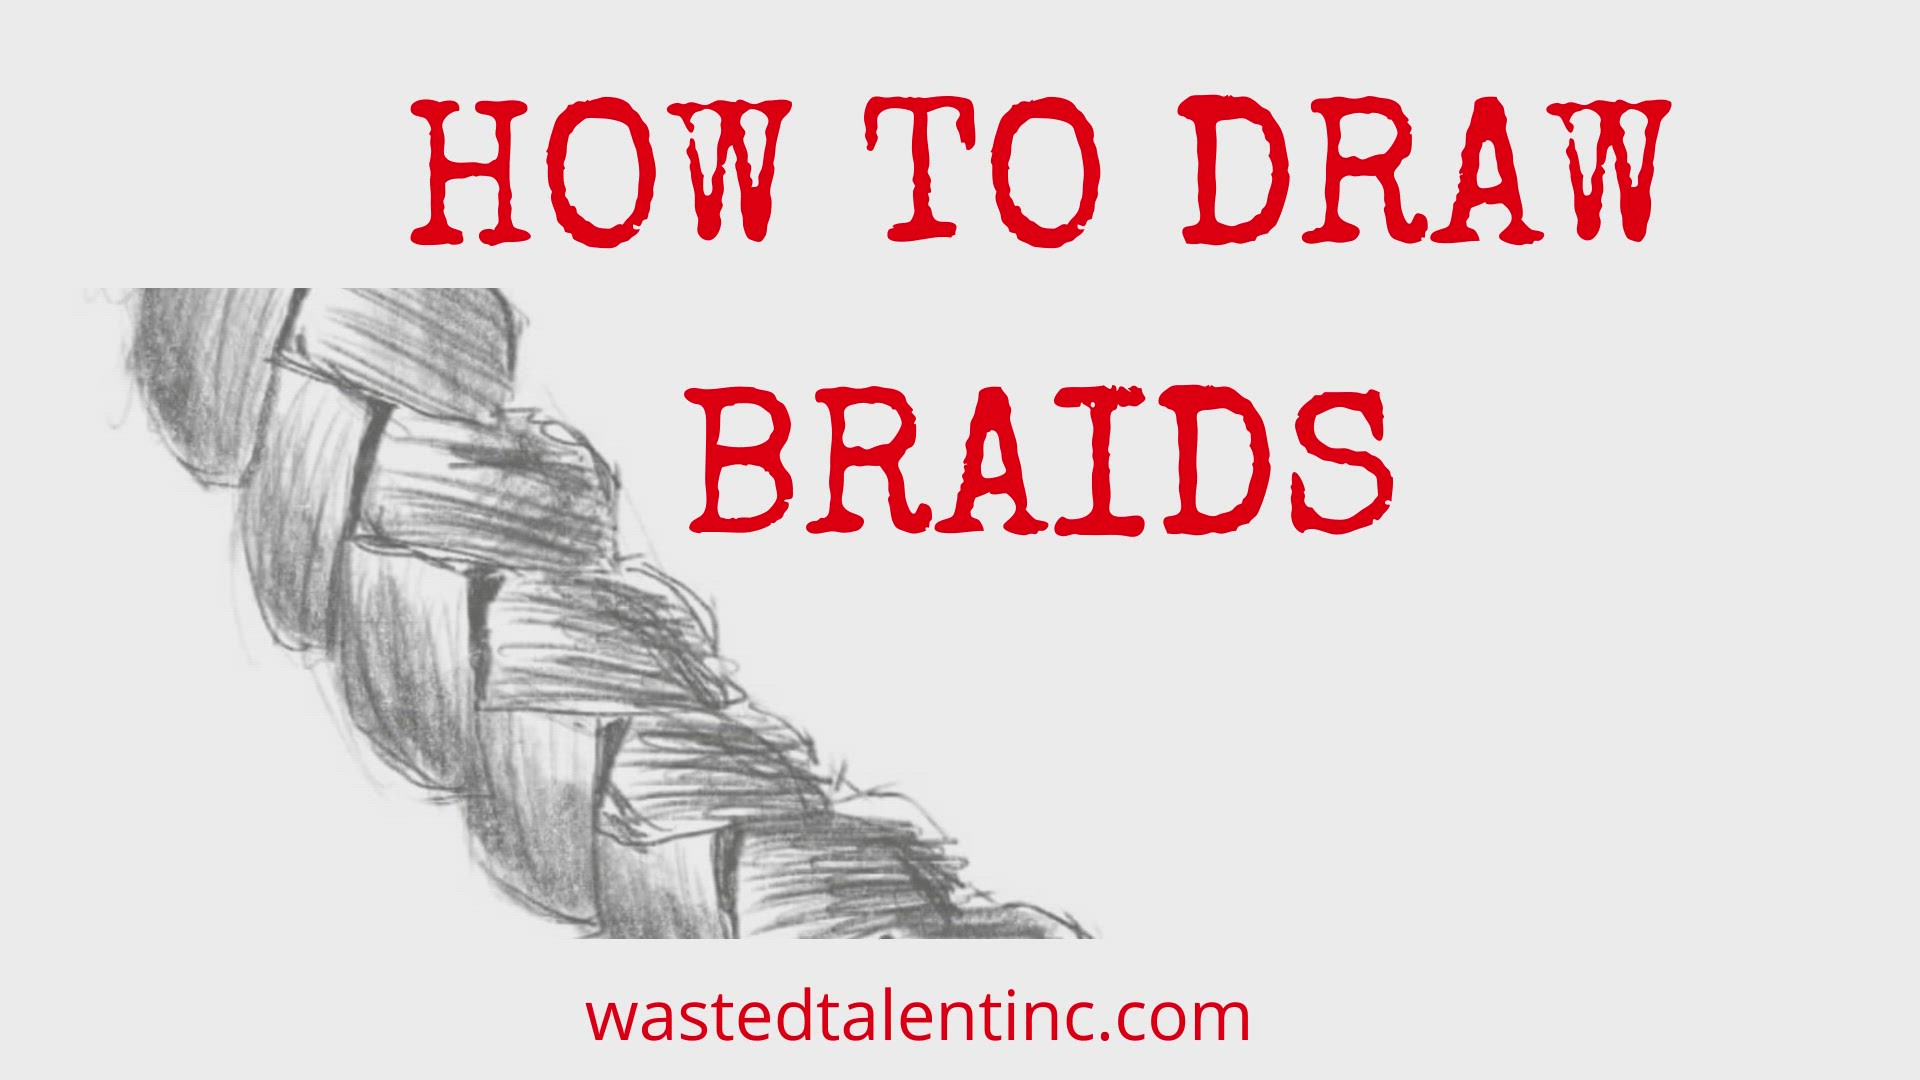 'Video thumbnail for How to Draw Braids'